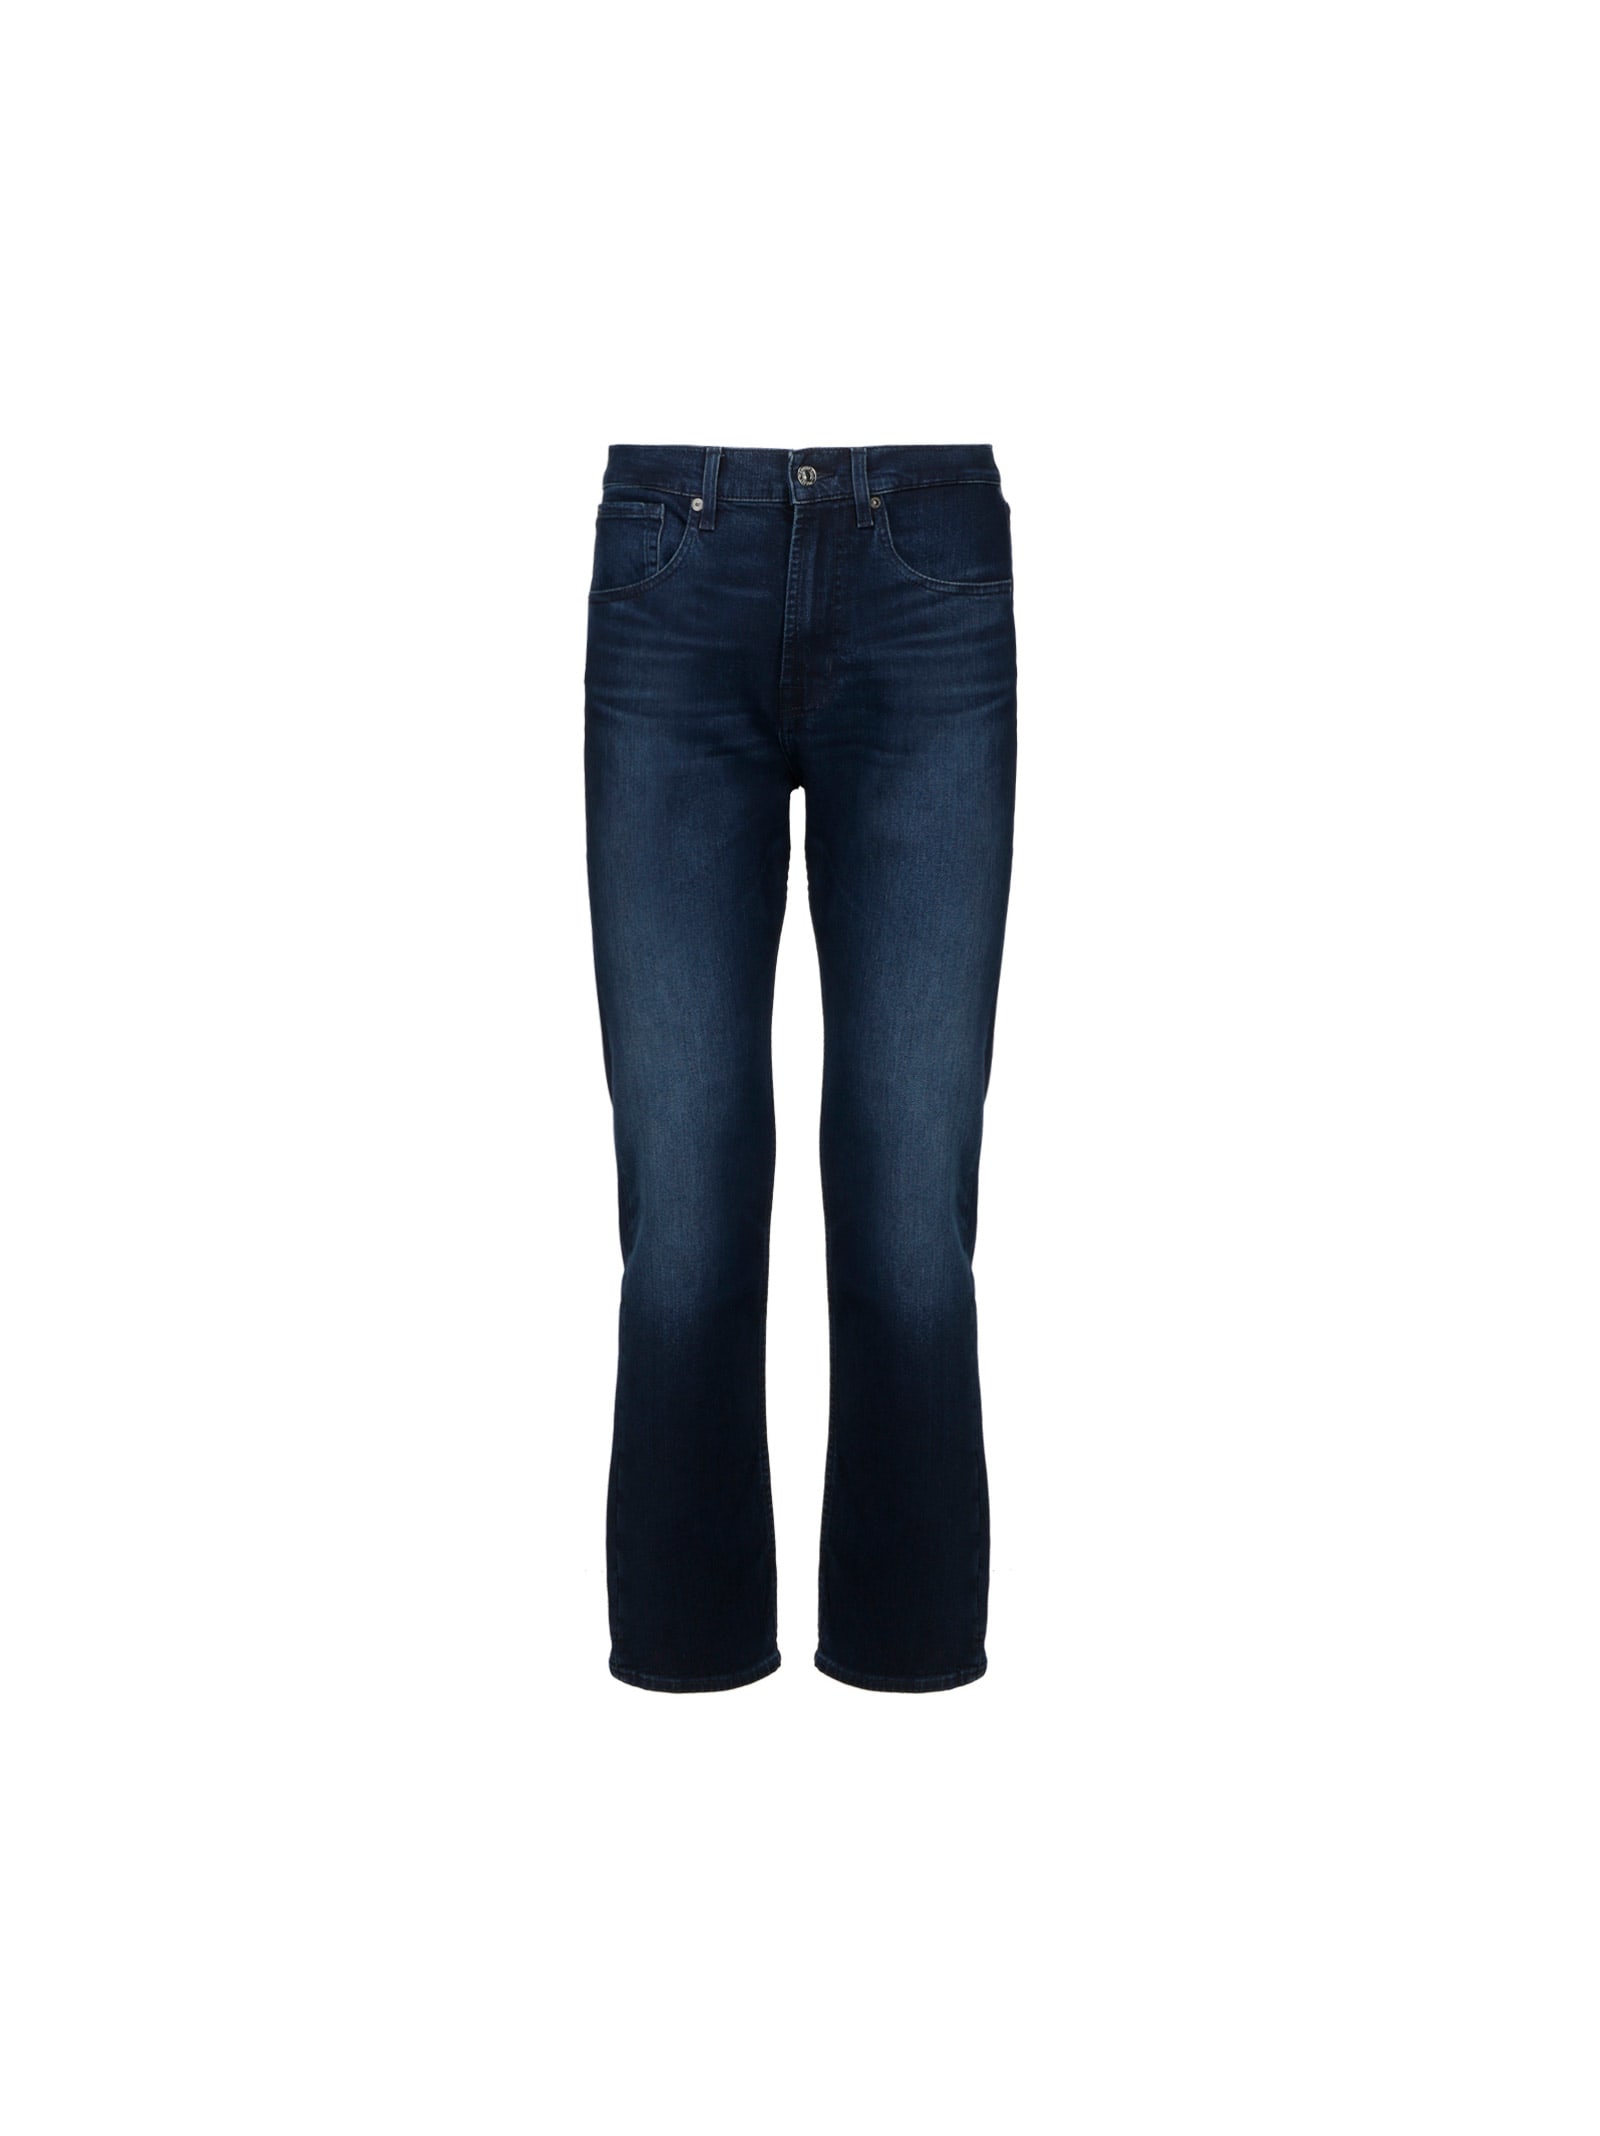 7 For All Mankind Cooper Jeans